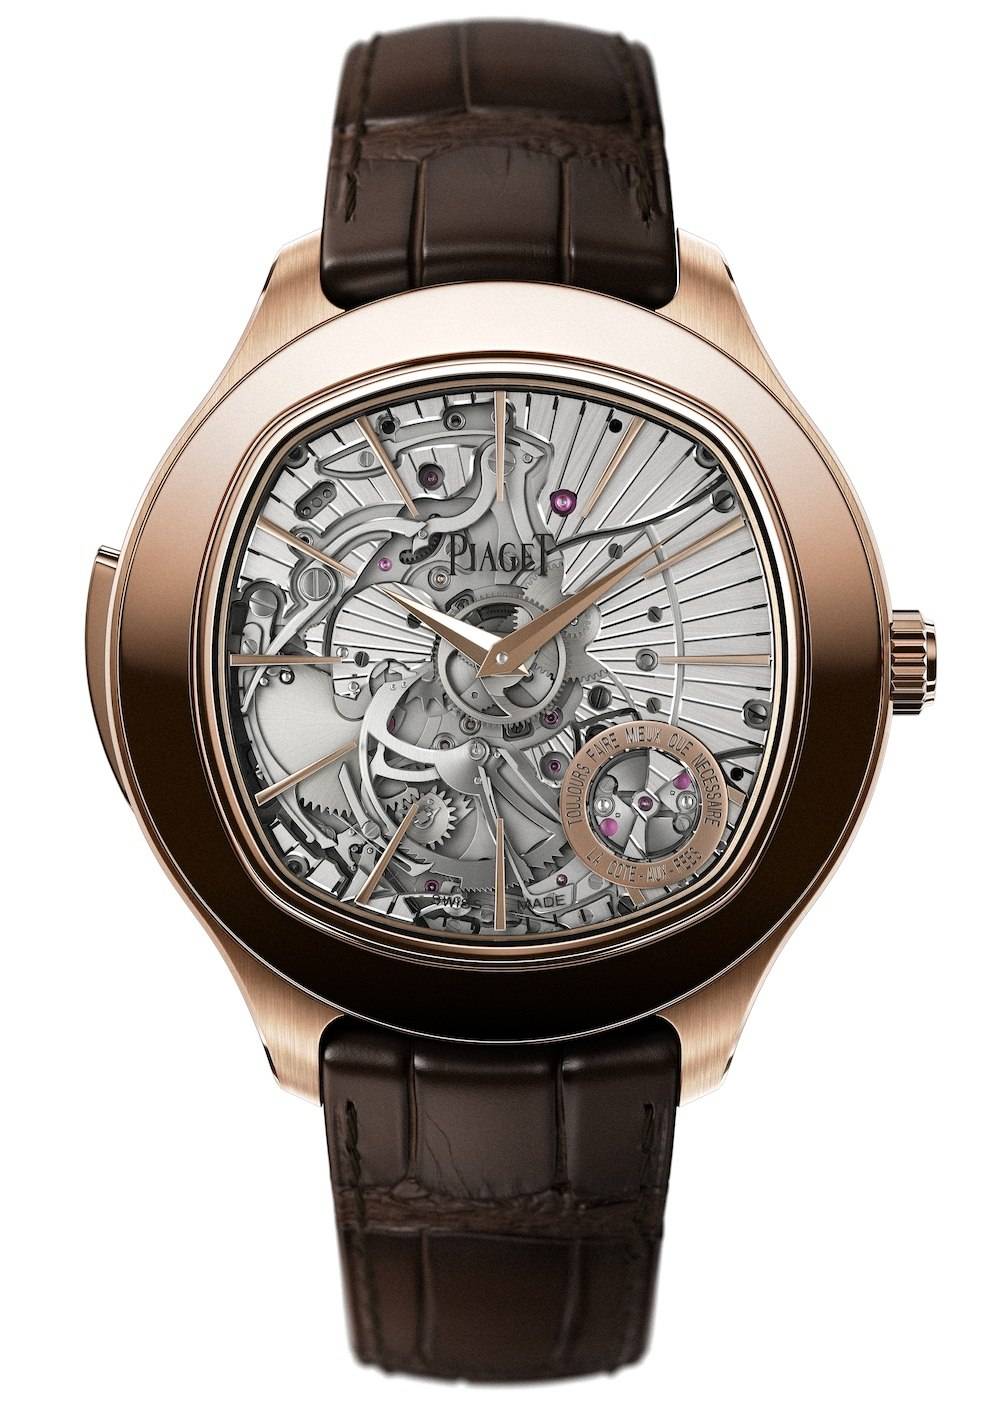 Haute Watch of the Week: Piaget Emperador Coussin Ultra-Thin Minute Repeater